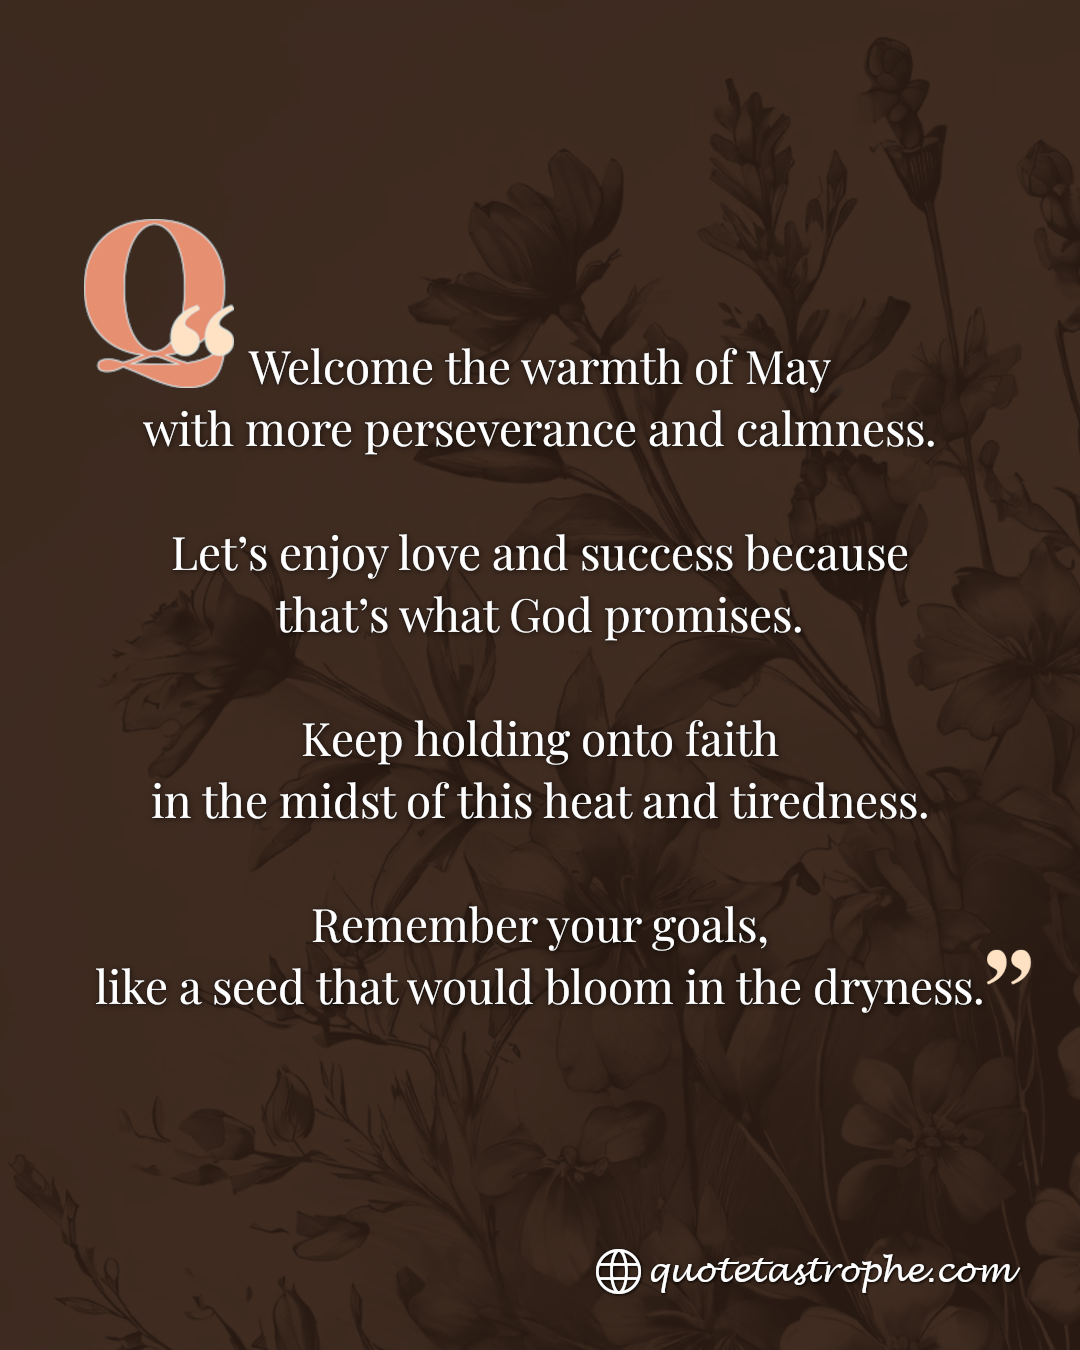 Welcome the Warmth of May with Perseverance & Calmness